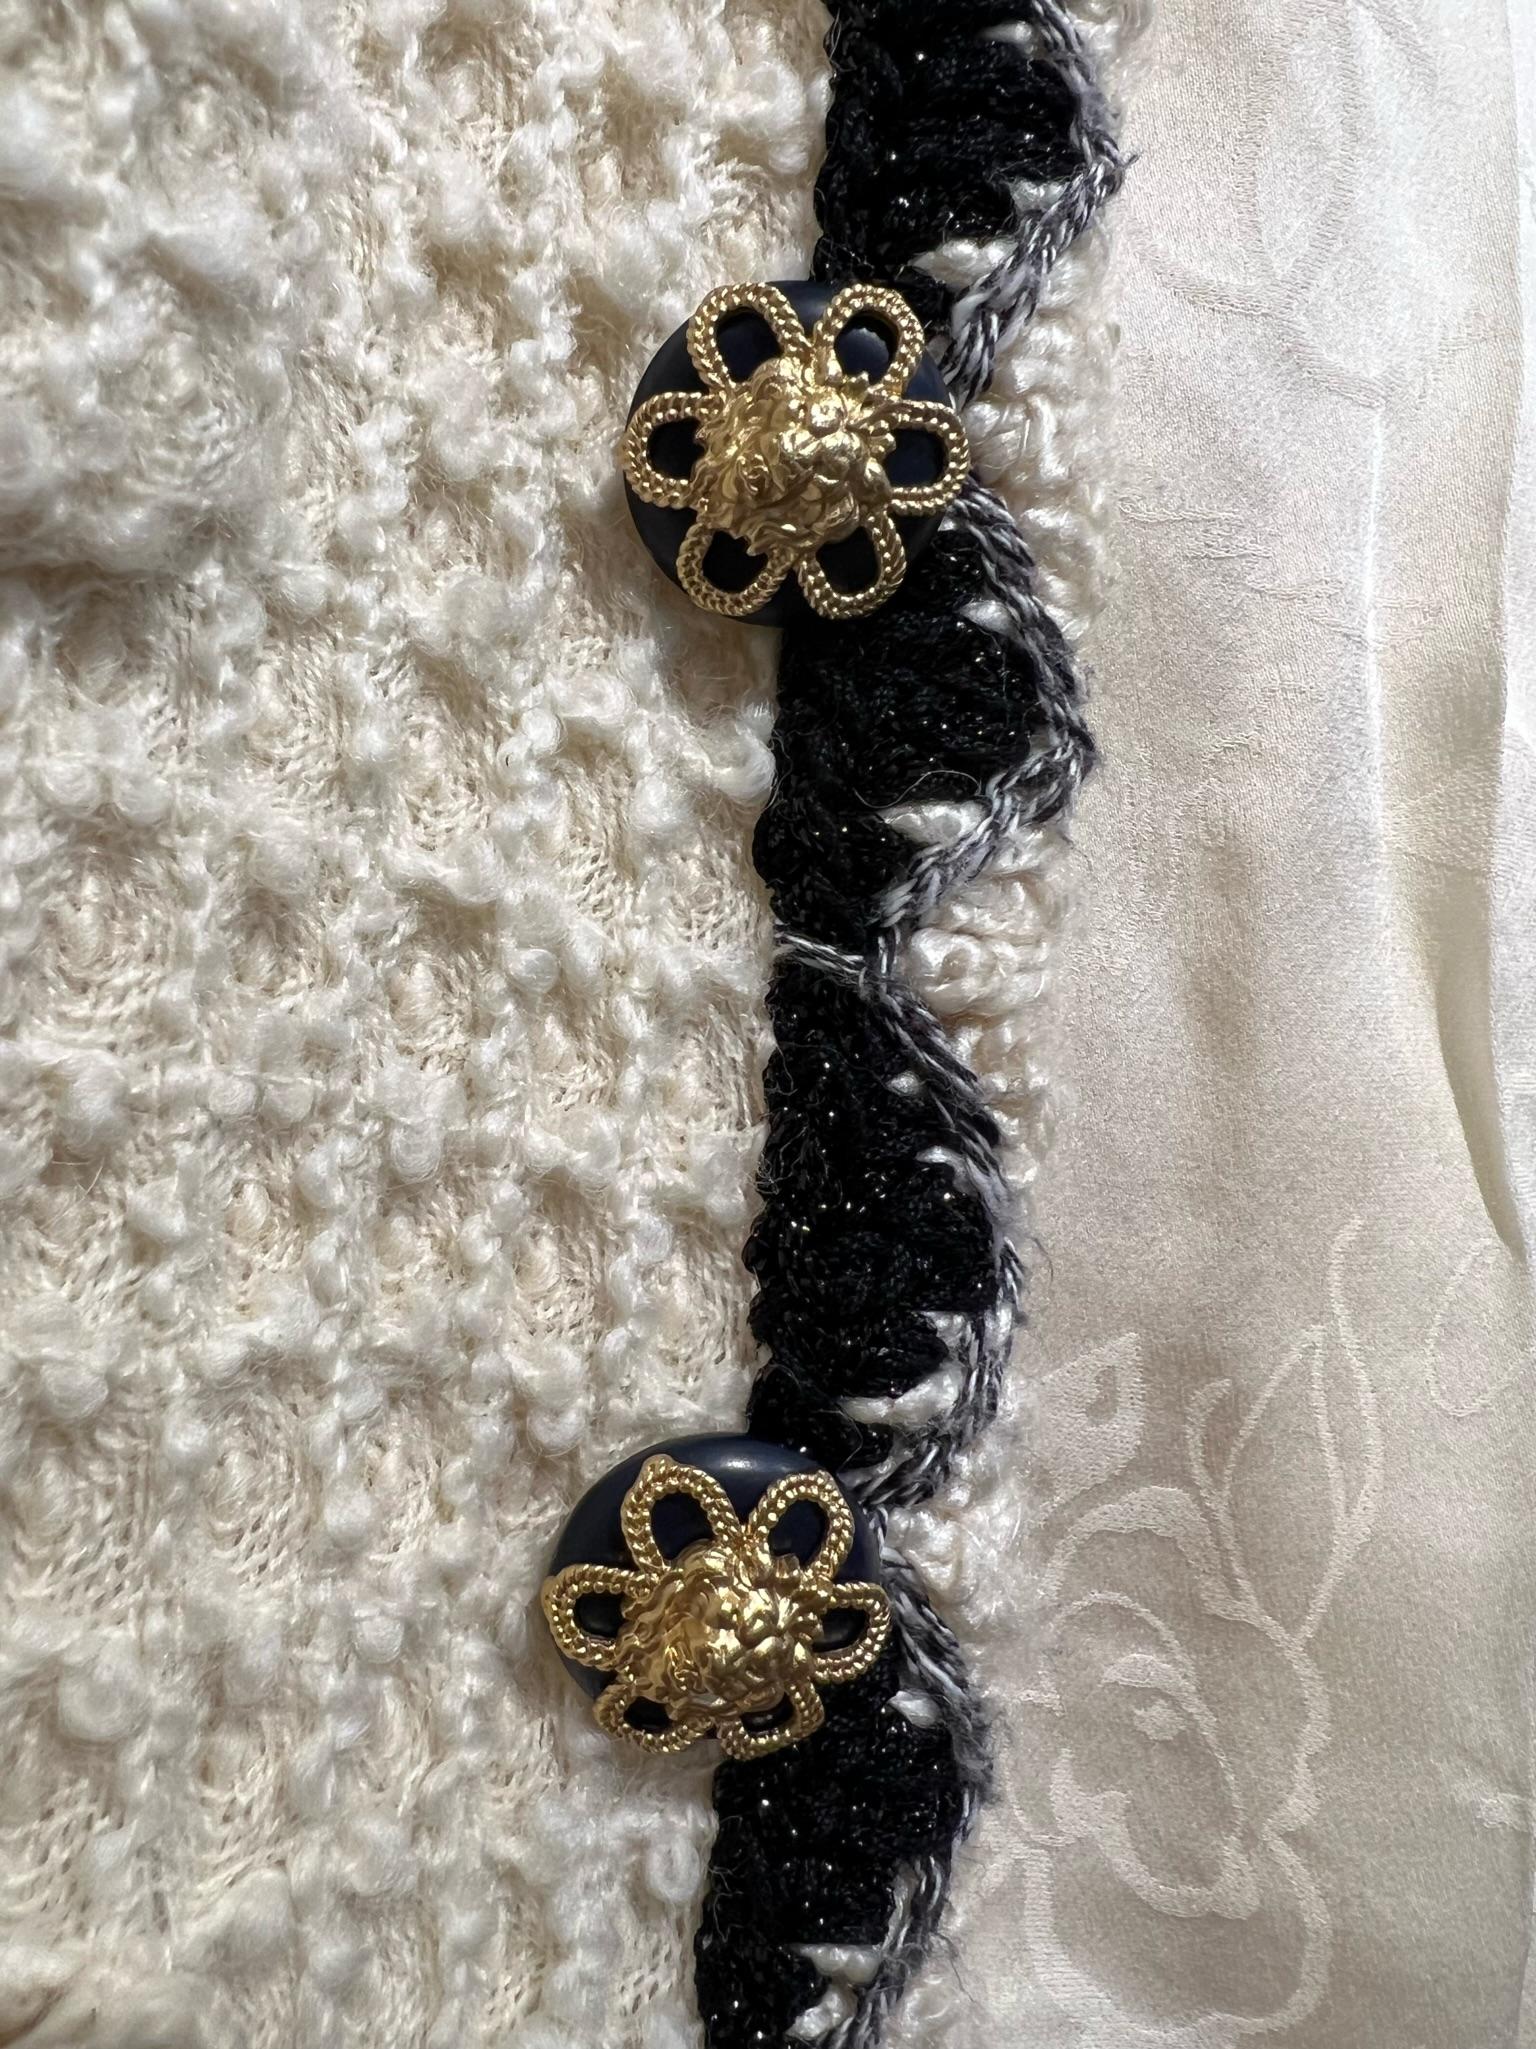 Chanel Women´s Jacket Cream With Black Trim Buttons With Gold Flowers. A classy Design